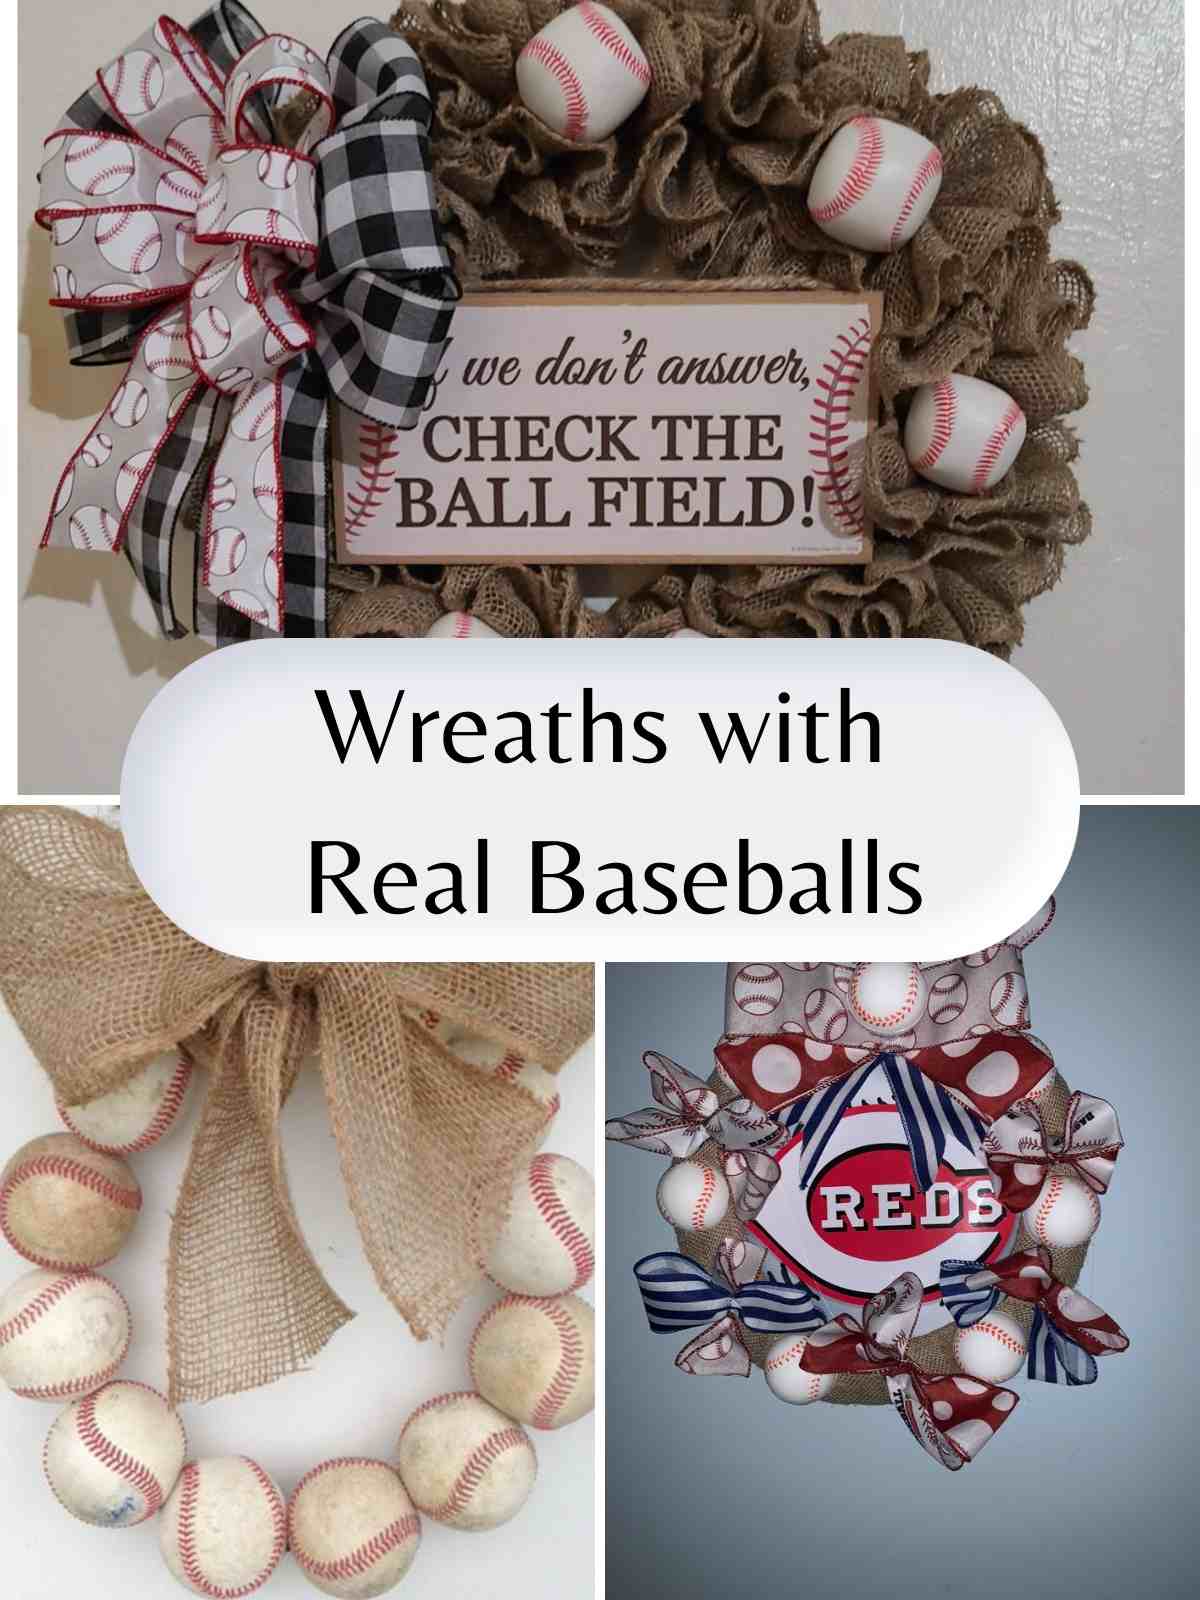 How to make a wreath with real baseballs